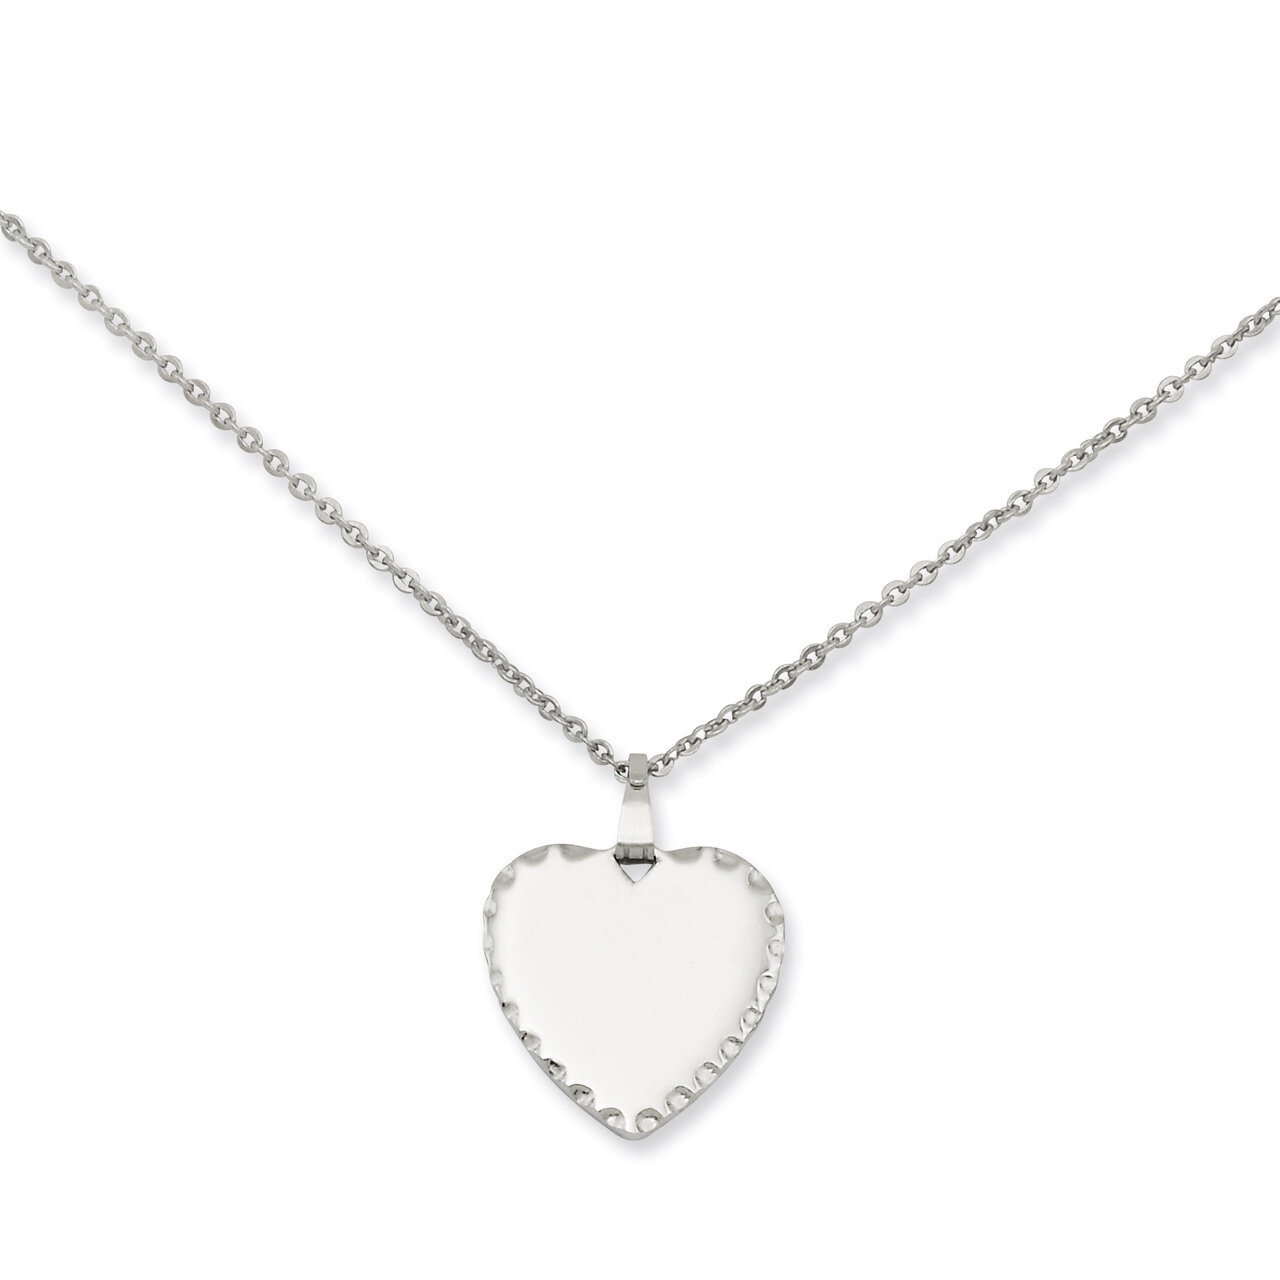 Kelly Waters Engravable Heart Disc Necklace 18 Inch Medium Polished KW351-18